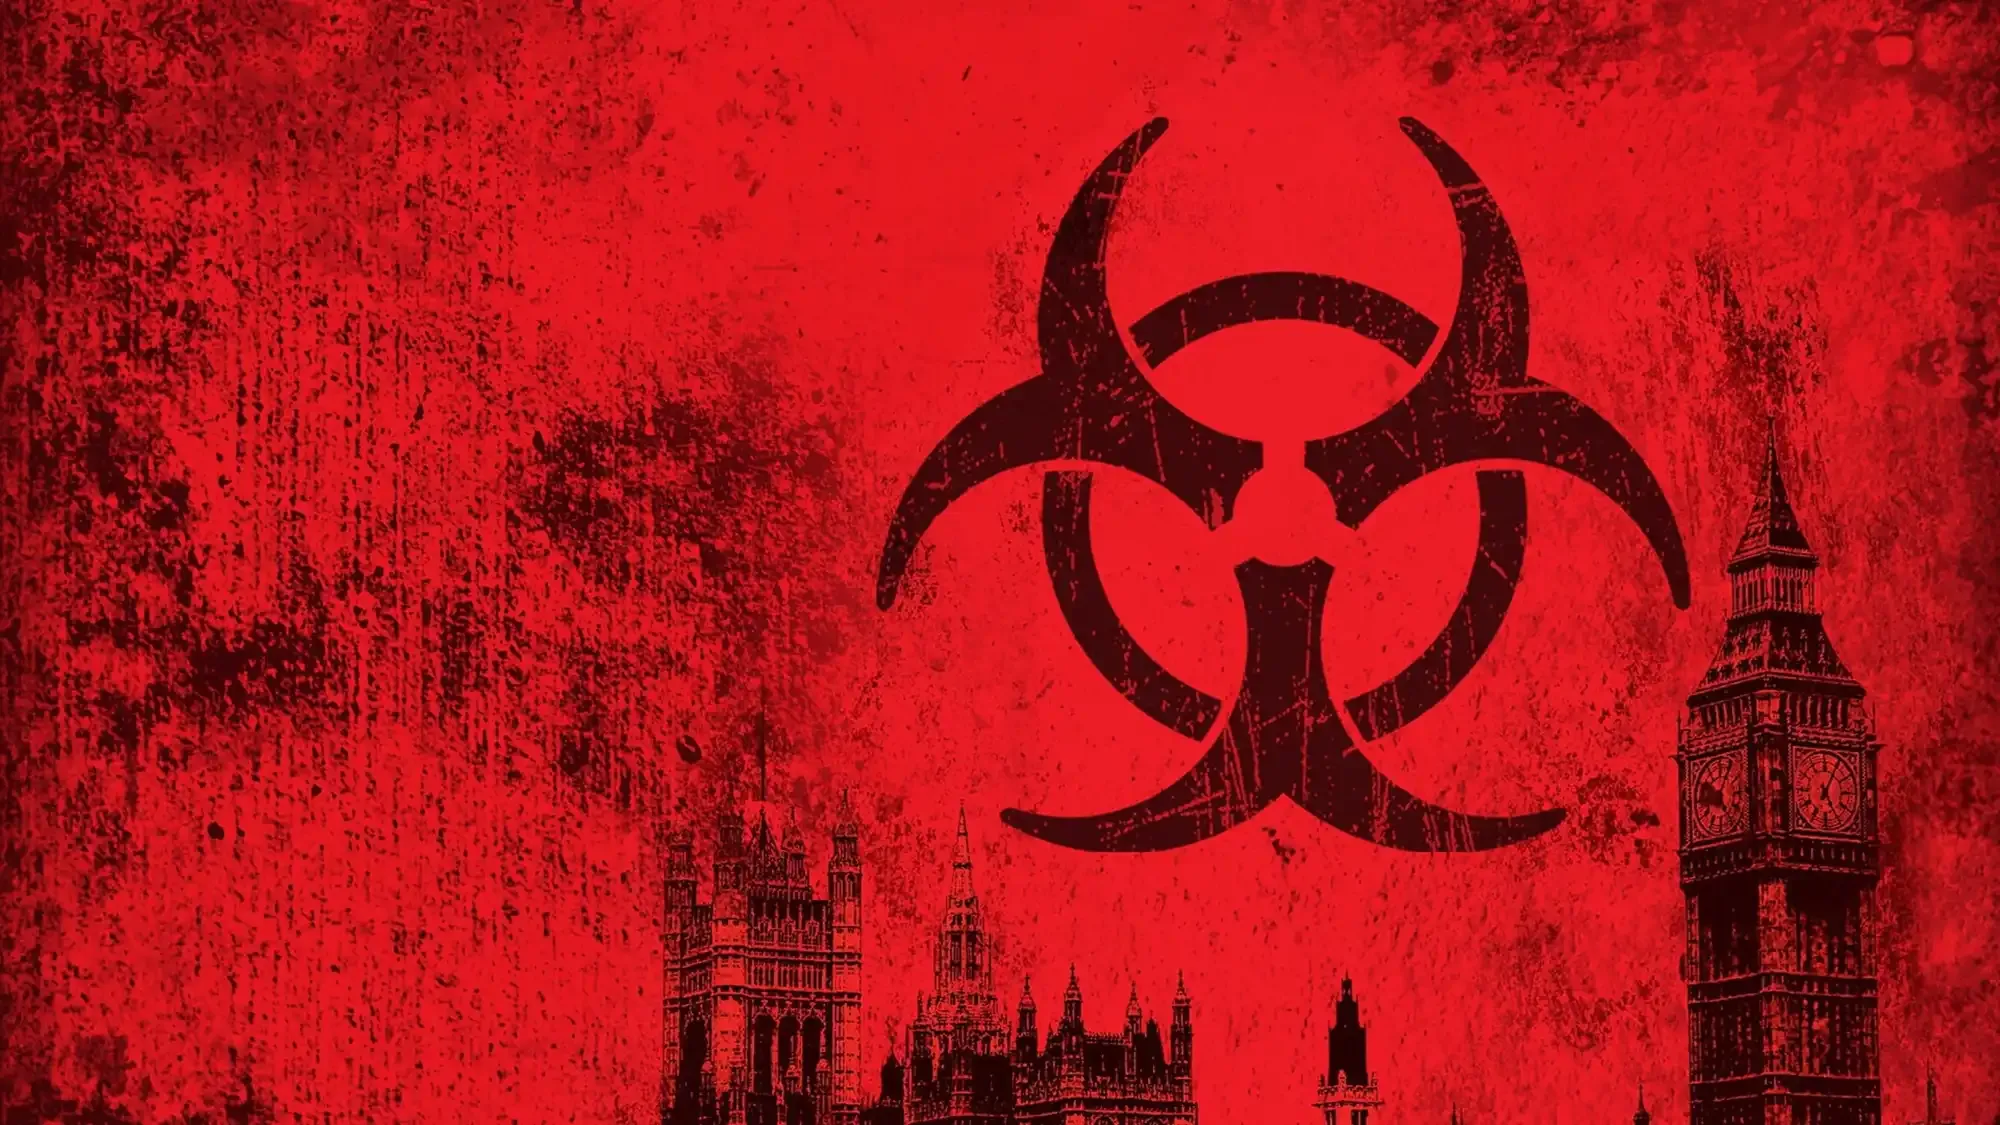 28 Days Later movie review